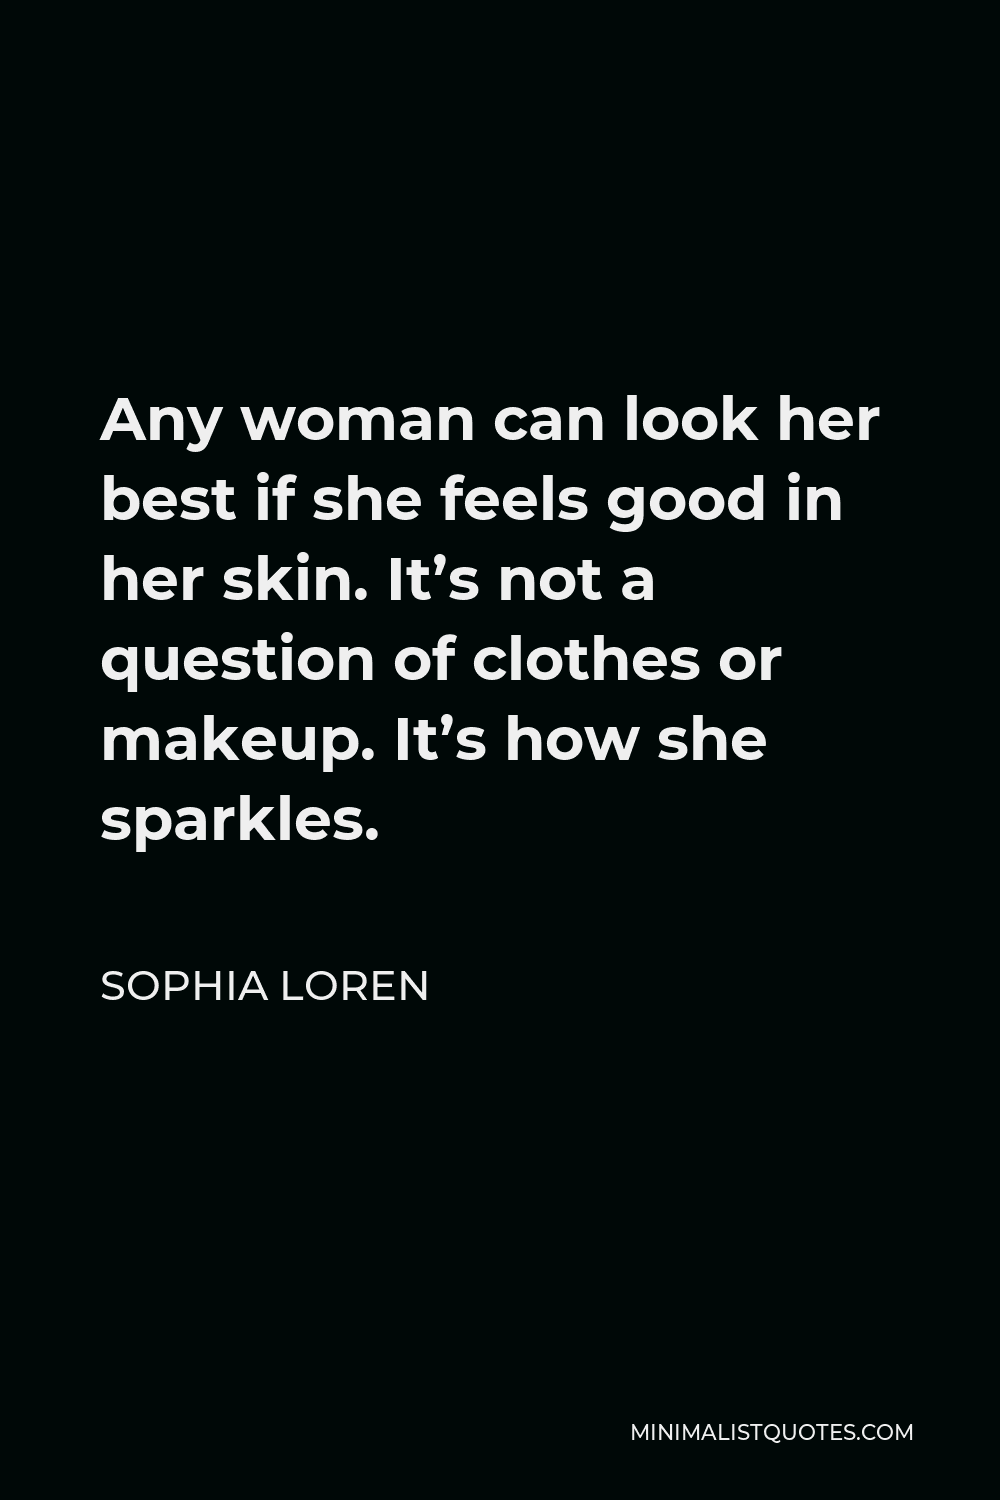 Sophia Loren Quote - Any woman can look her best if she feels good in her skin. It’s not a question of clothes or makeup. It’s how she sparkles.